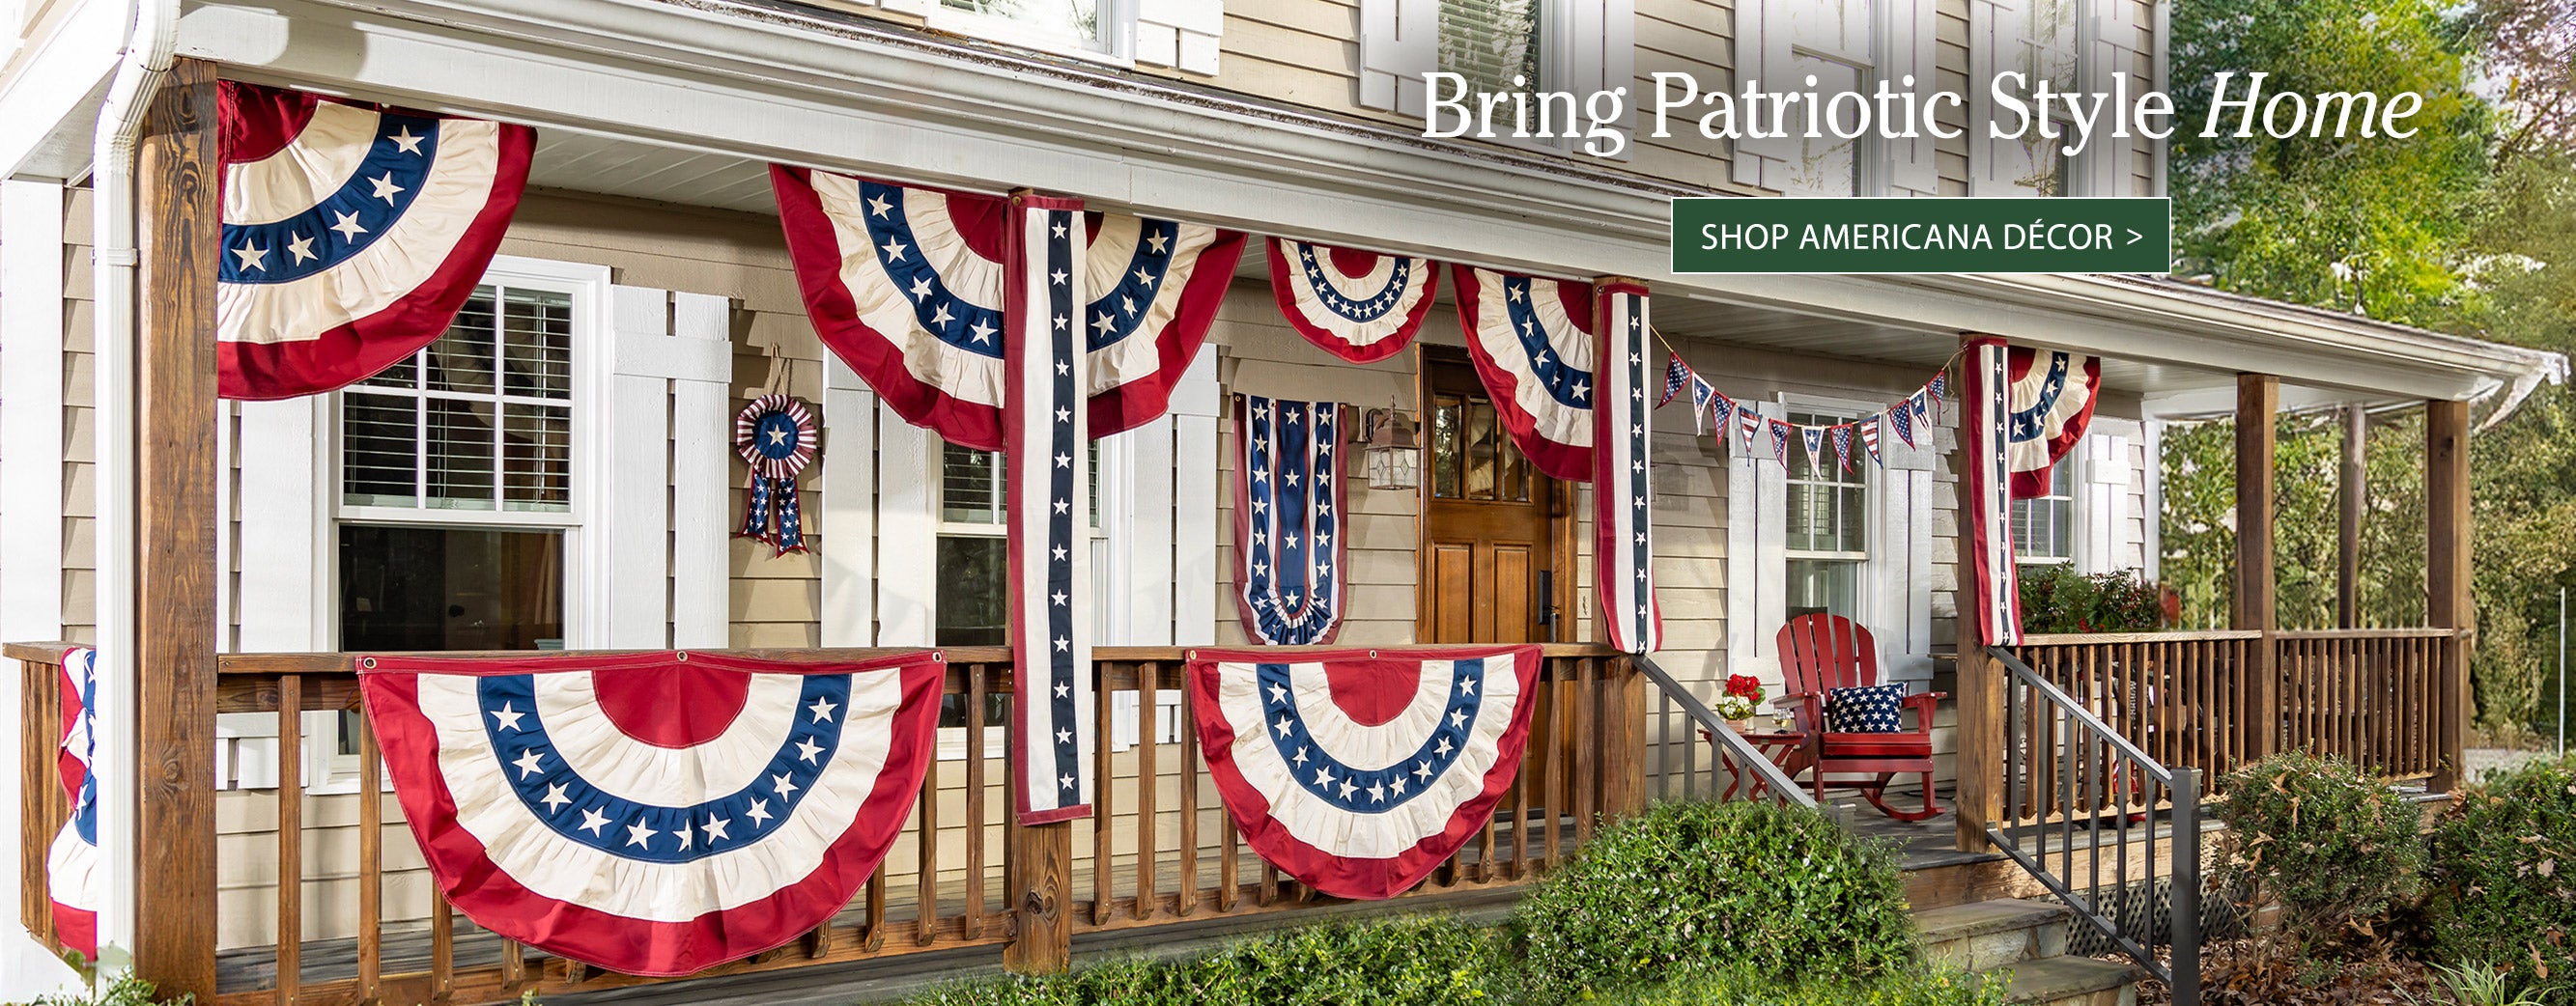 Image of americana buntings on front porch. Bring Patriotic Style Home SHOP AMERICANA DECOR